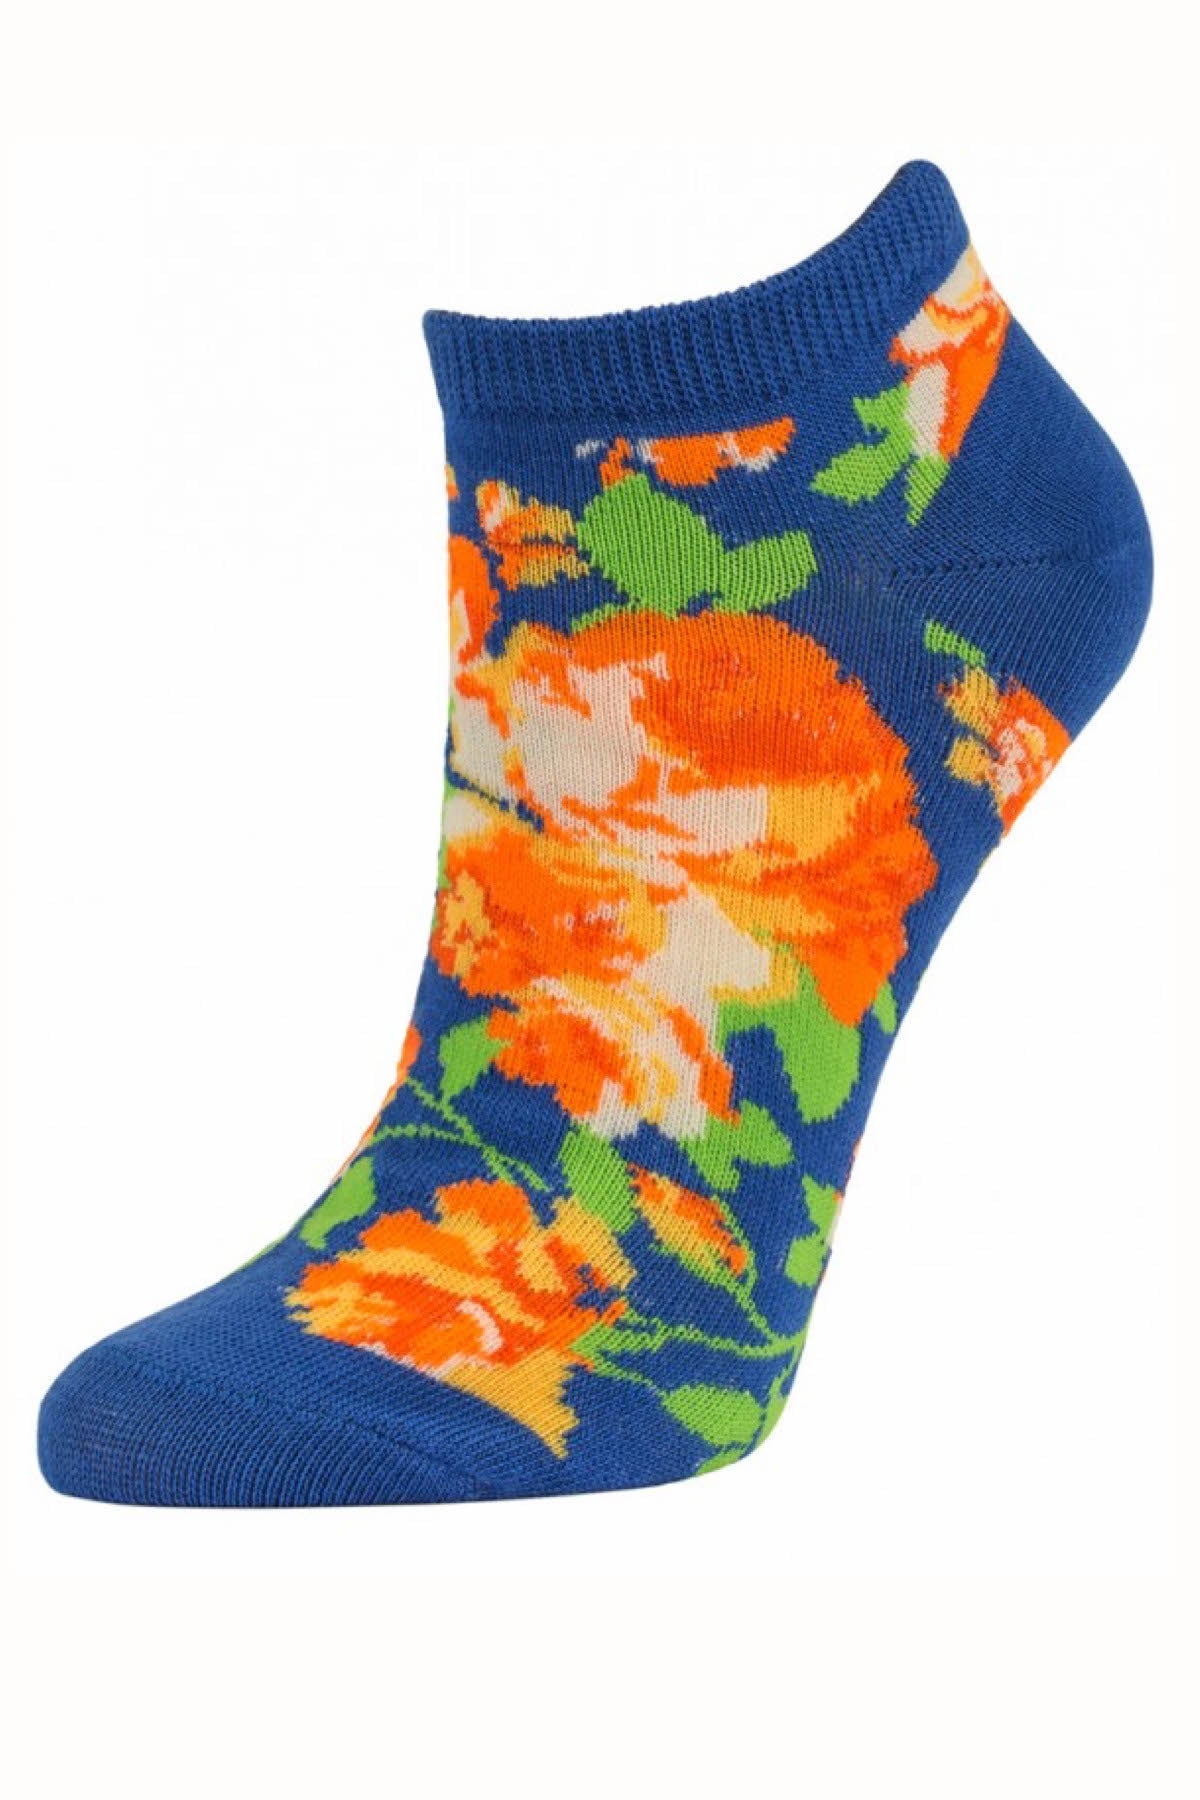 Sofra Blue Floral No Show Socks 2-Pairs